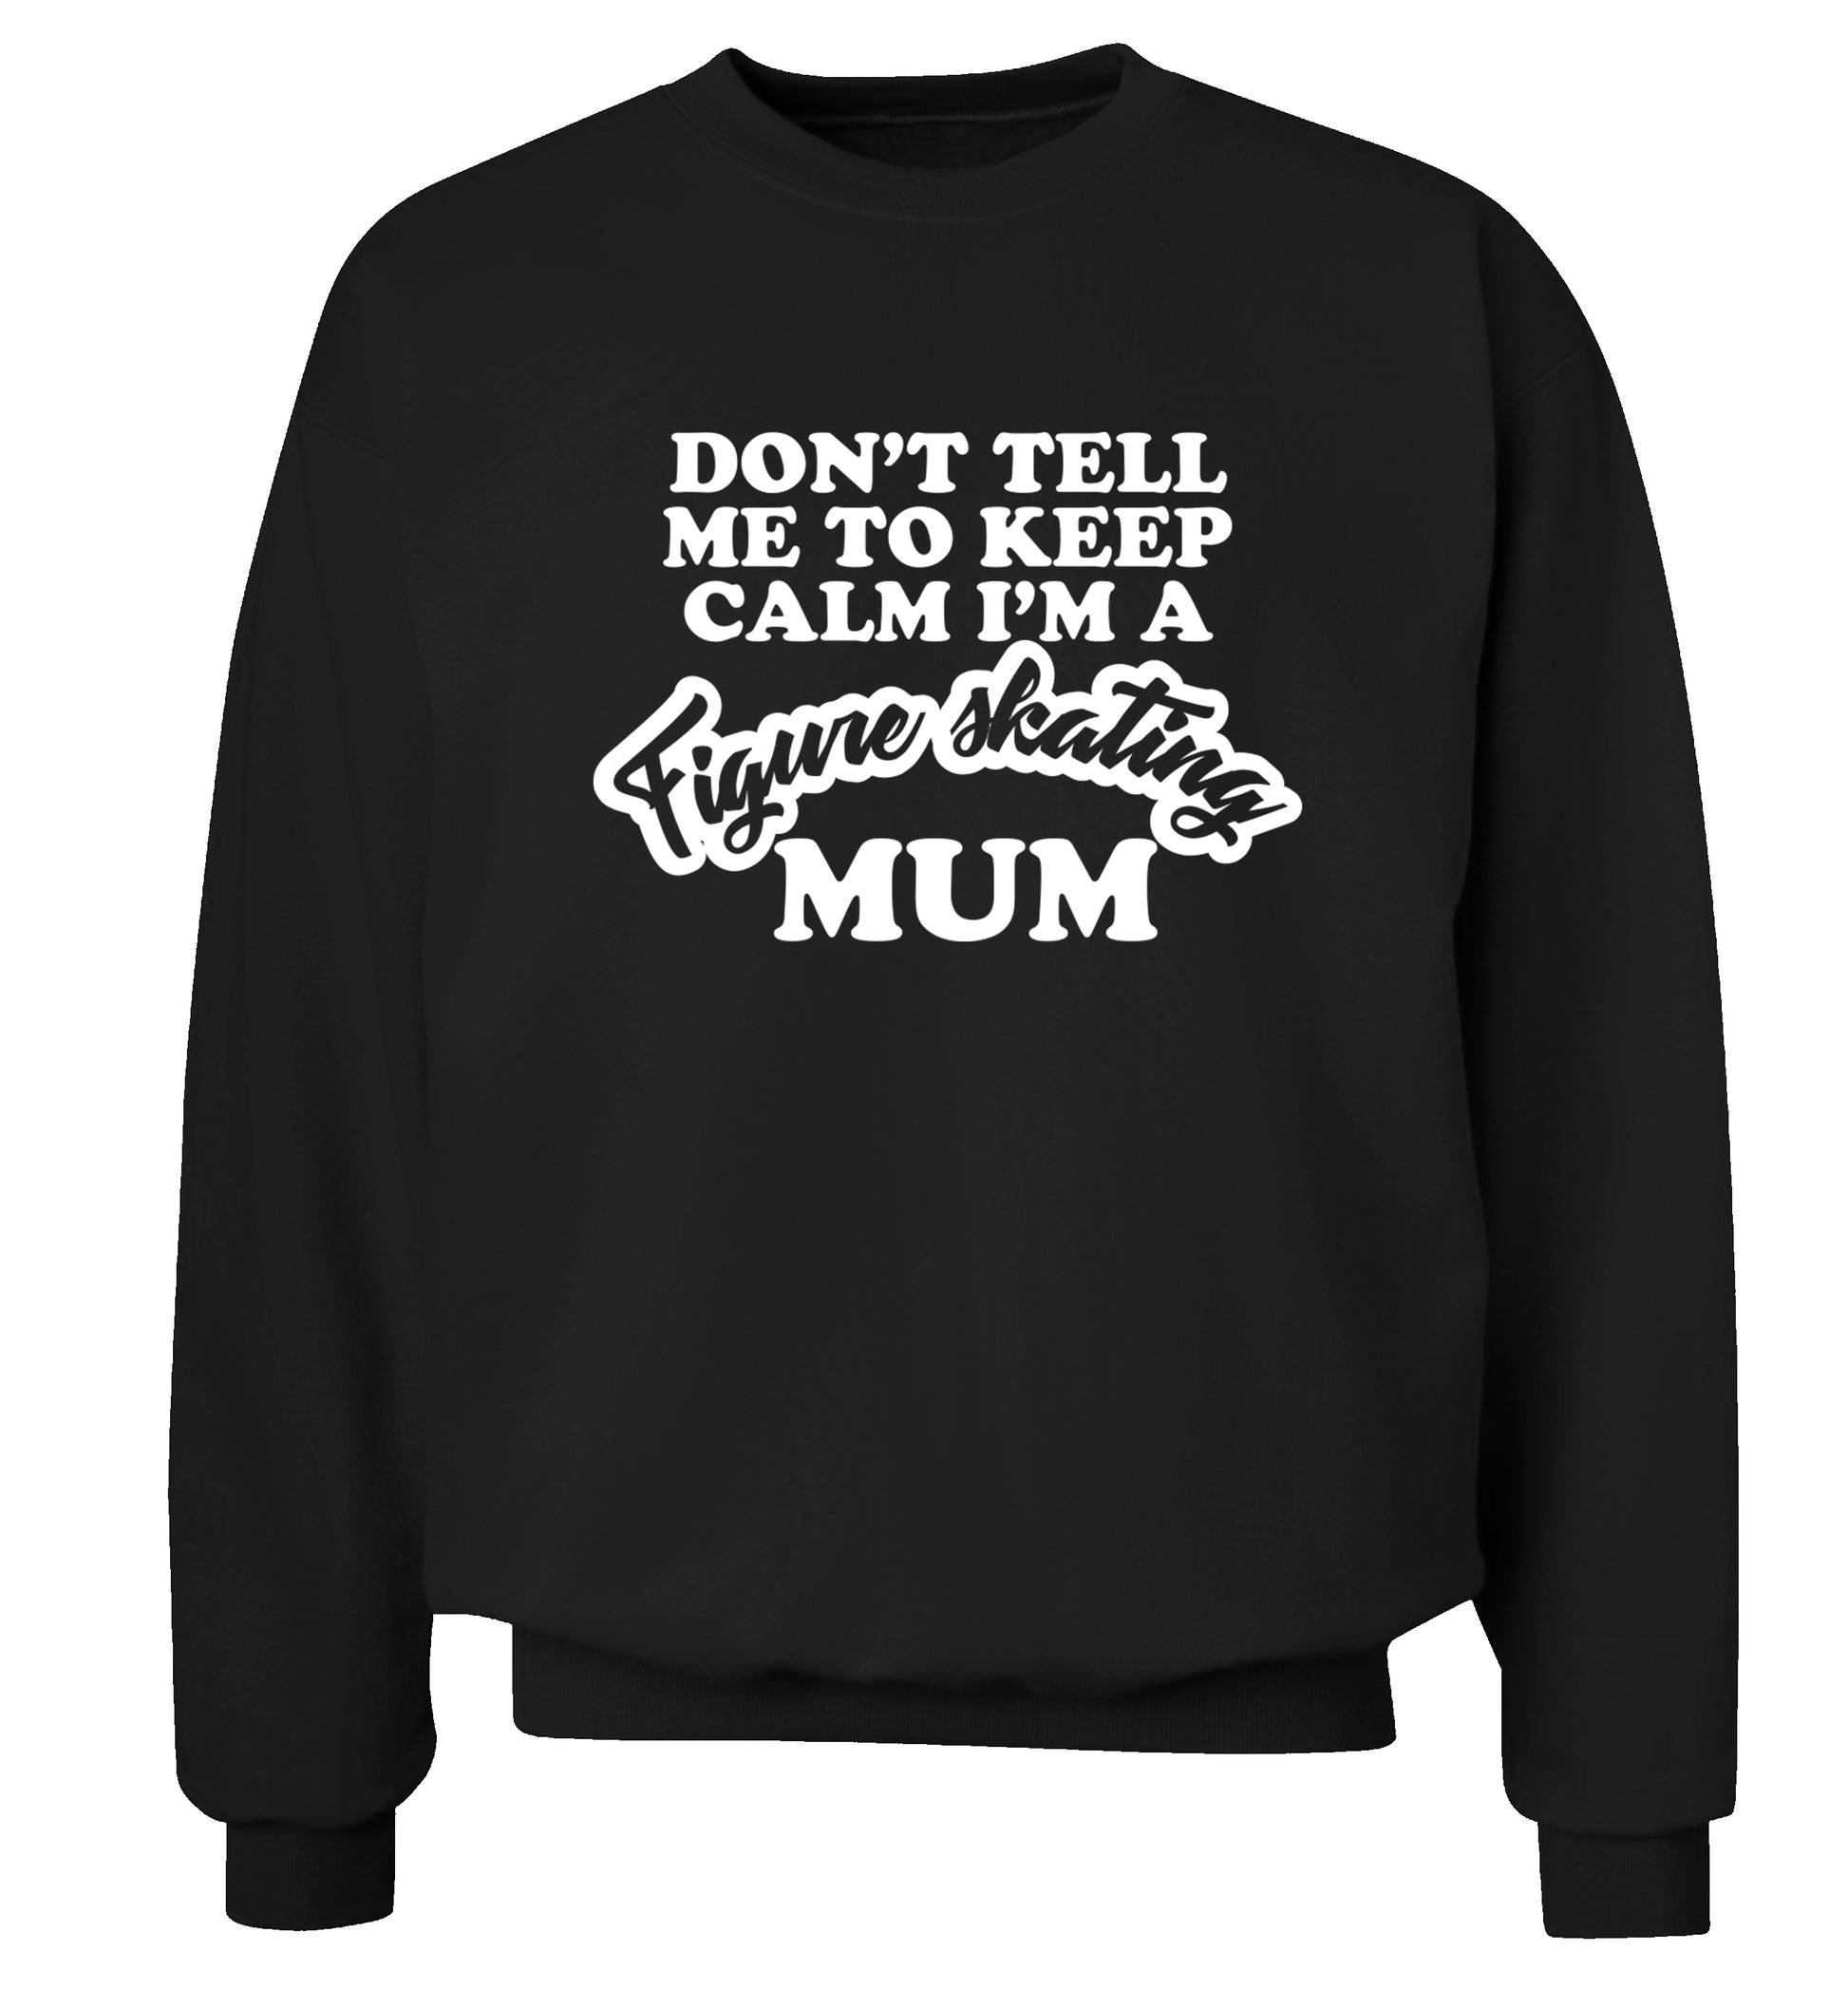 Don't tell me to keep calm I'm a figure skating mum Adult's unisexblack Sweater 2XL